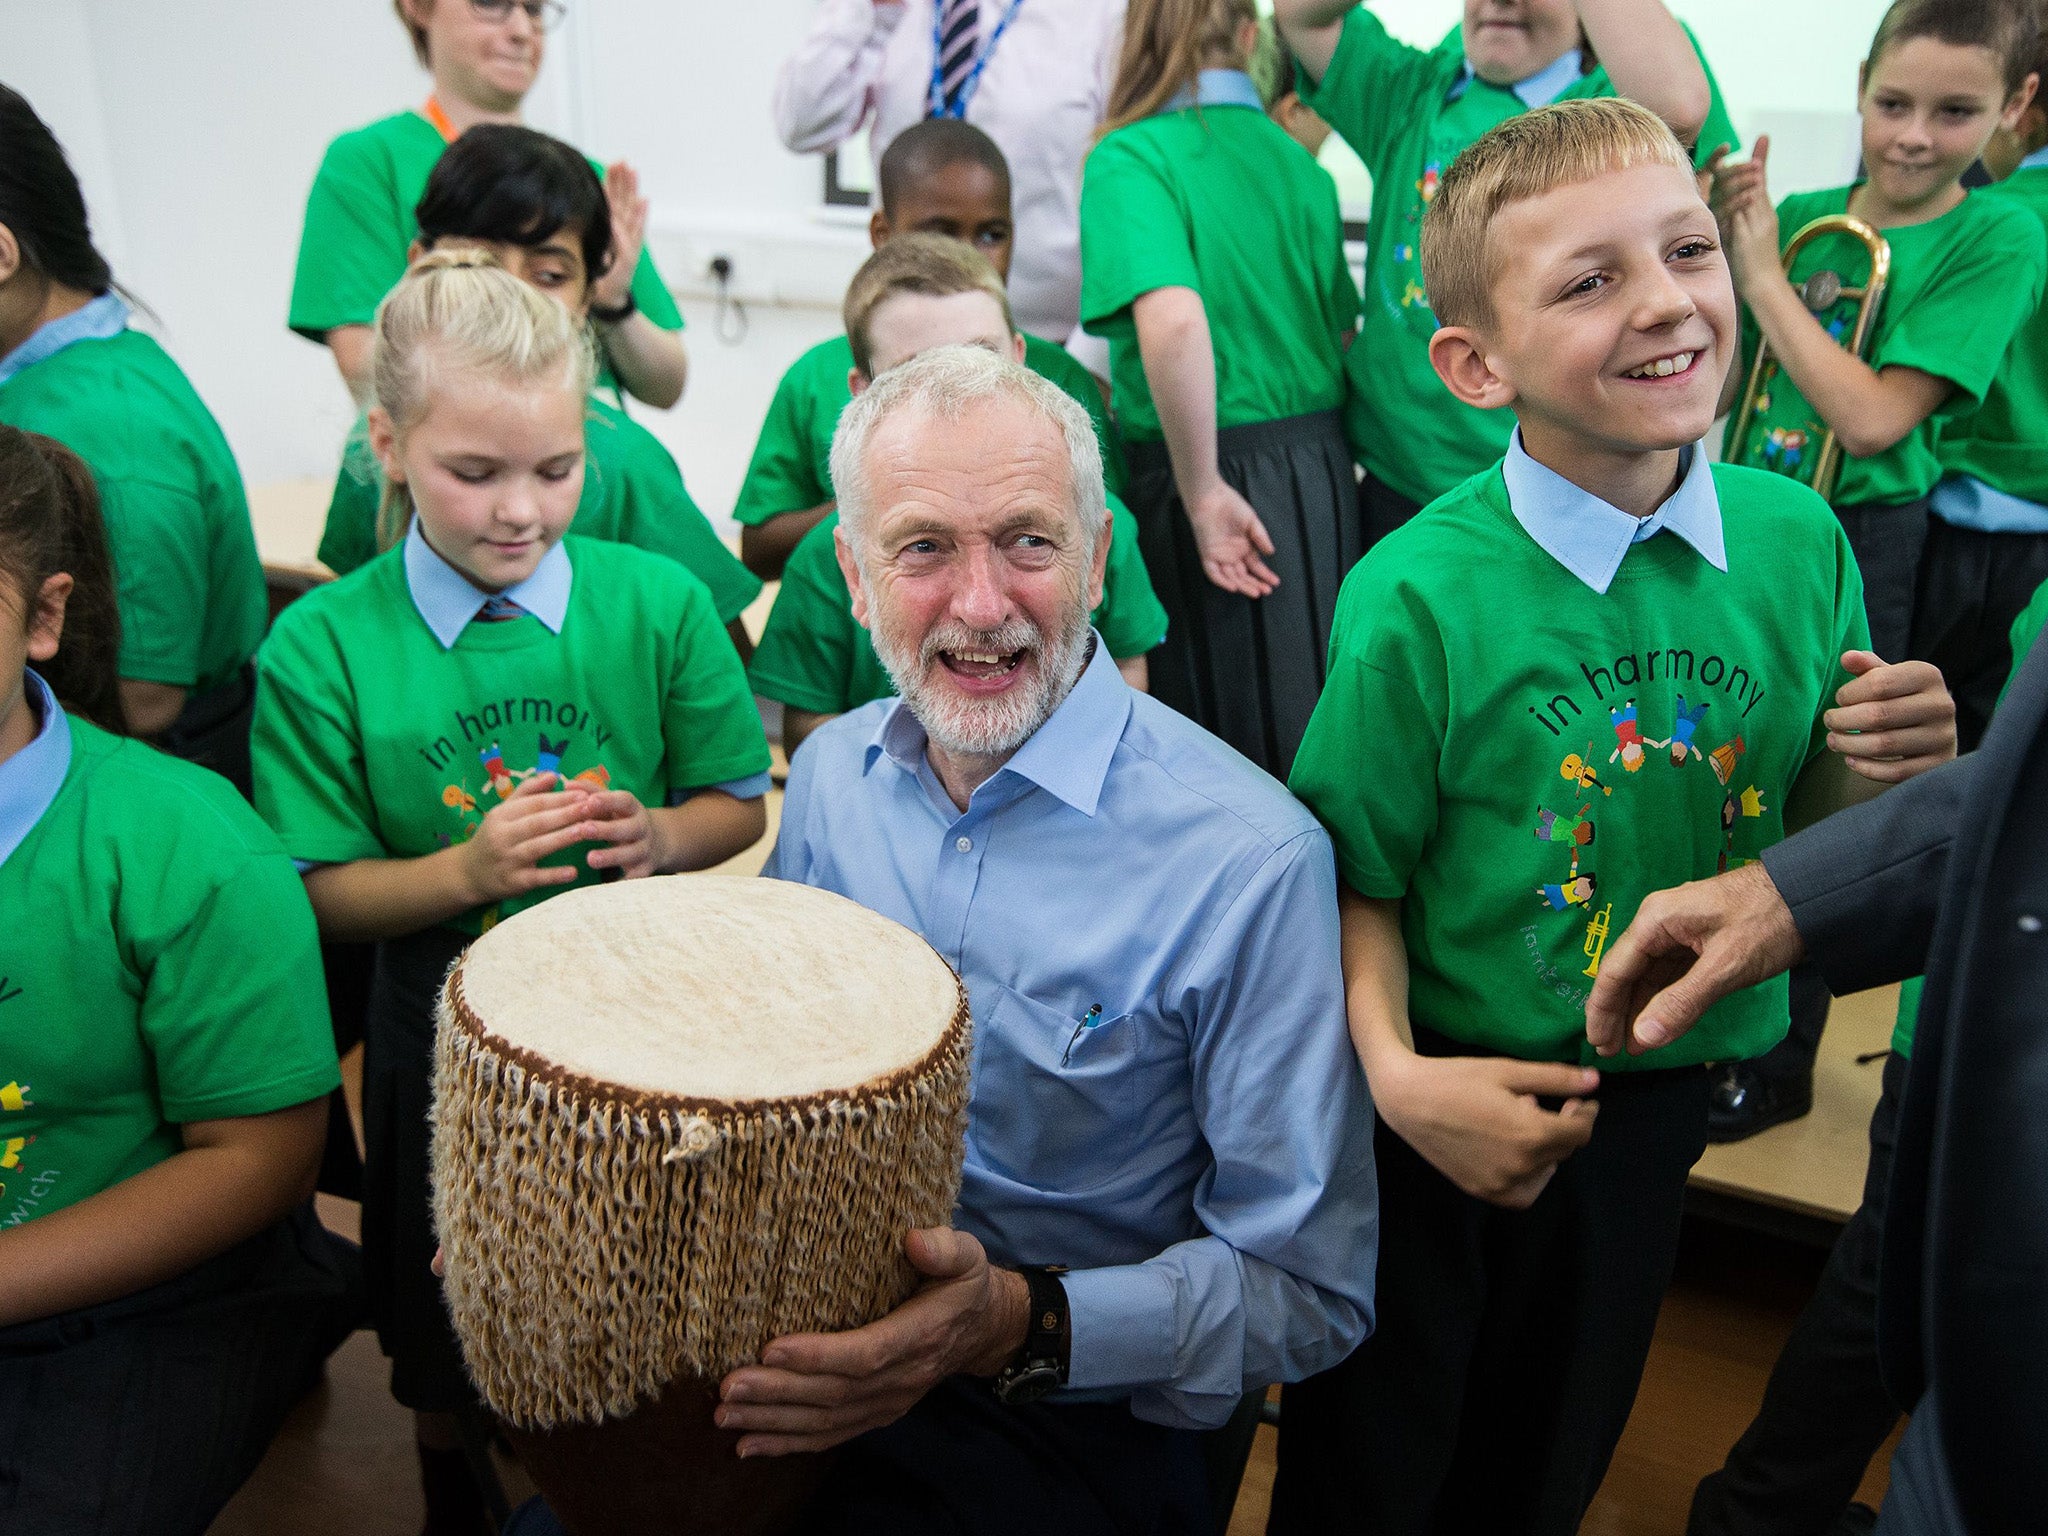 Jeremy Corbyn pledges Labour government would expand free childcare to all 2-4 year olds and open 1,000 new Sure Start centres